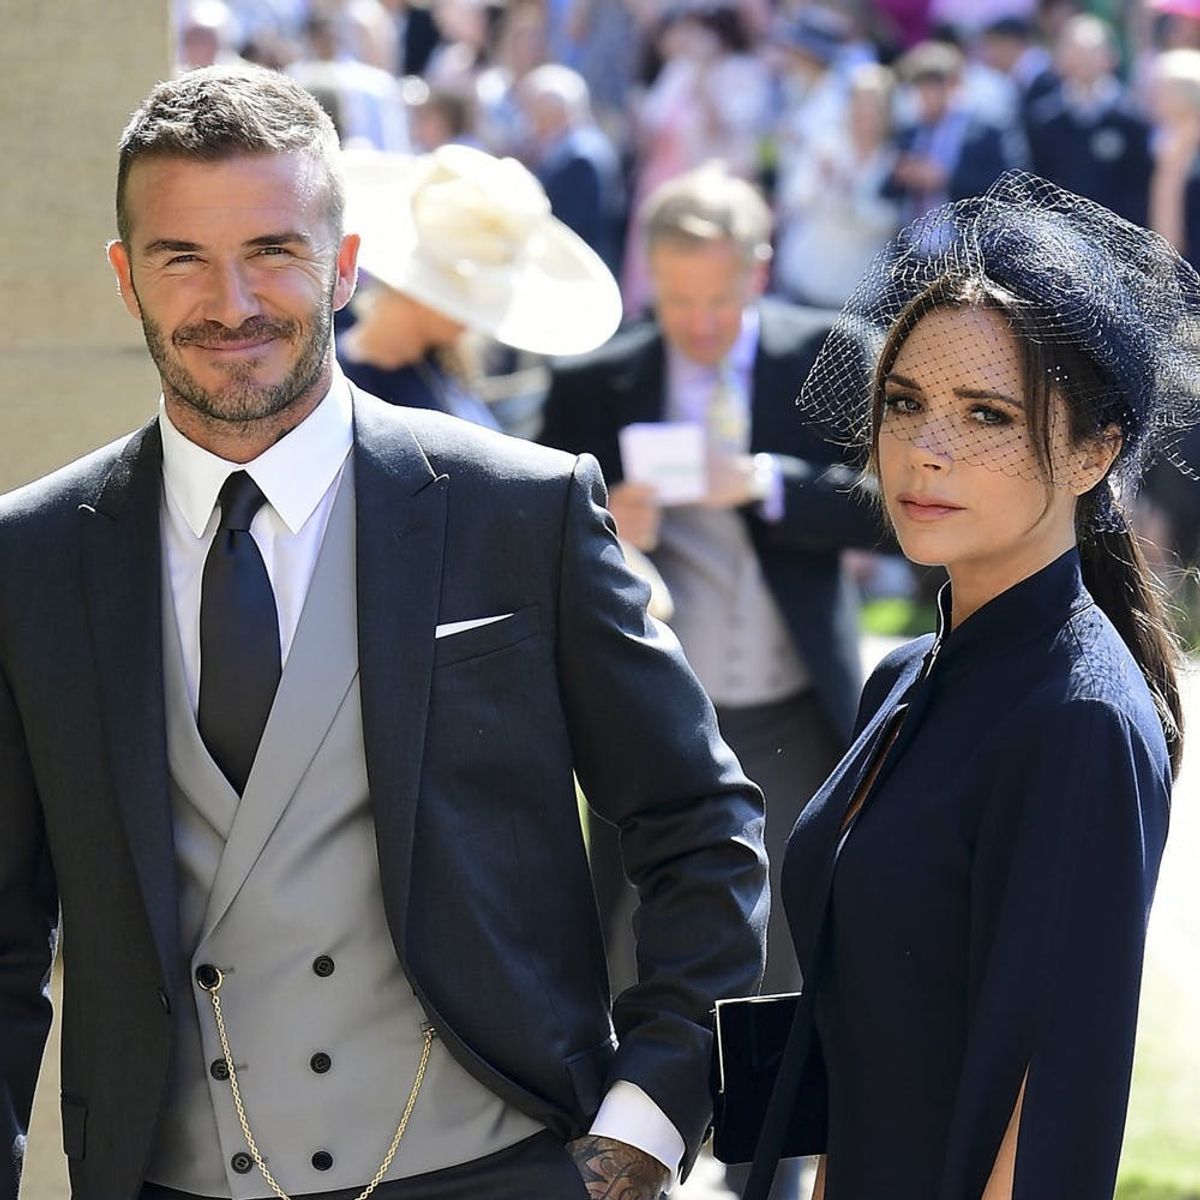 All the Celebs and VIPs at the Royal Wedding